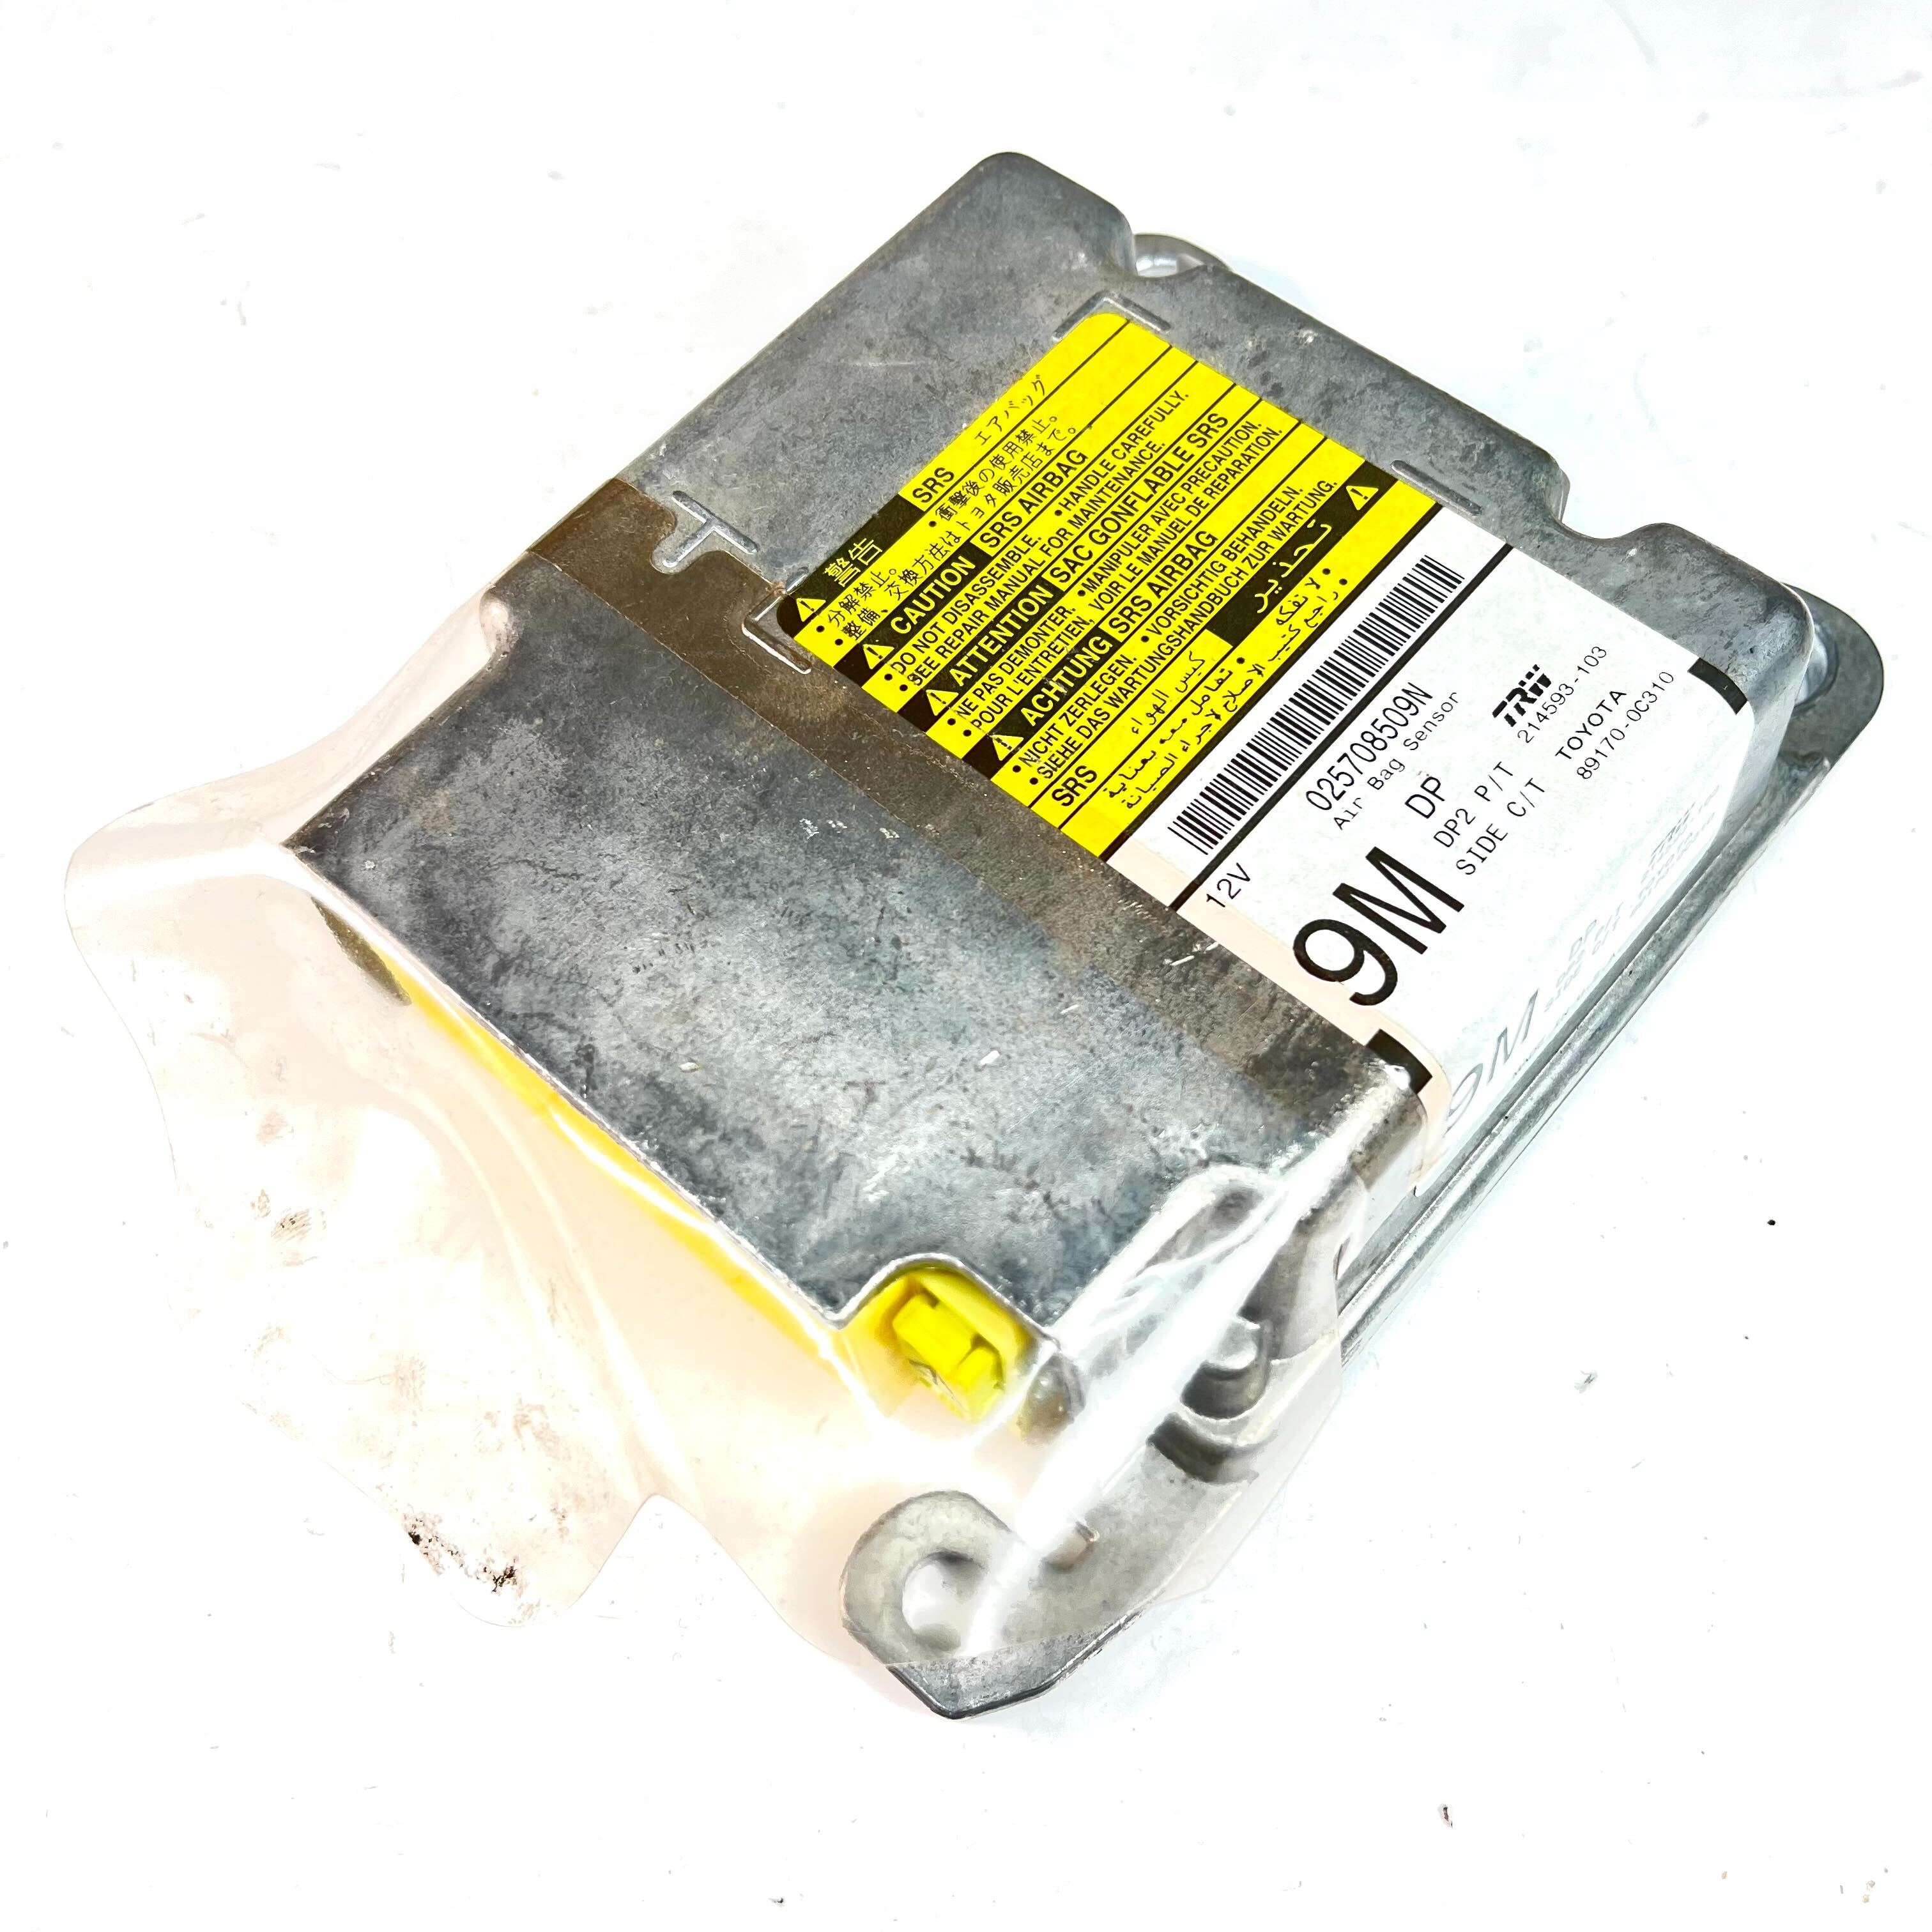 TOYOTA TUNDRA SRS Airbag Computer Diagnostic Control Module PART #891700C310